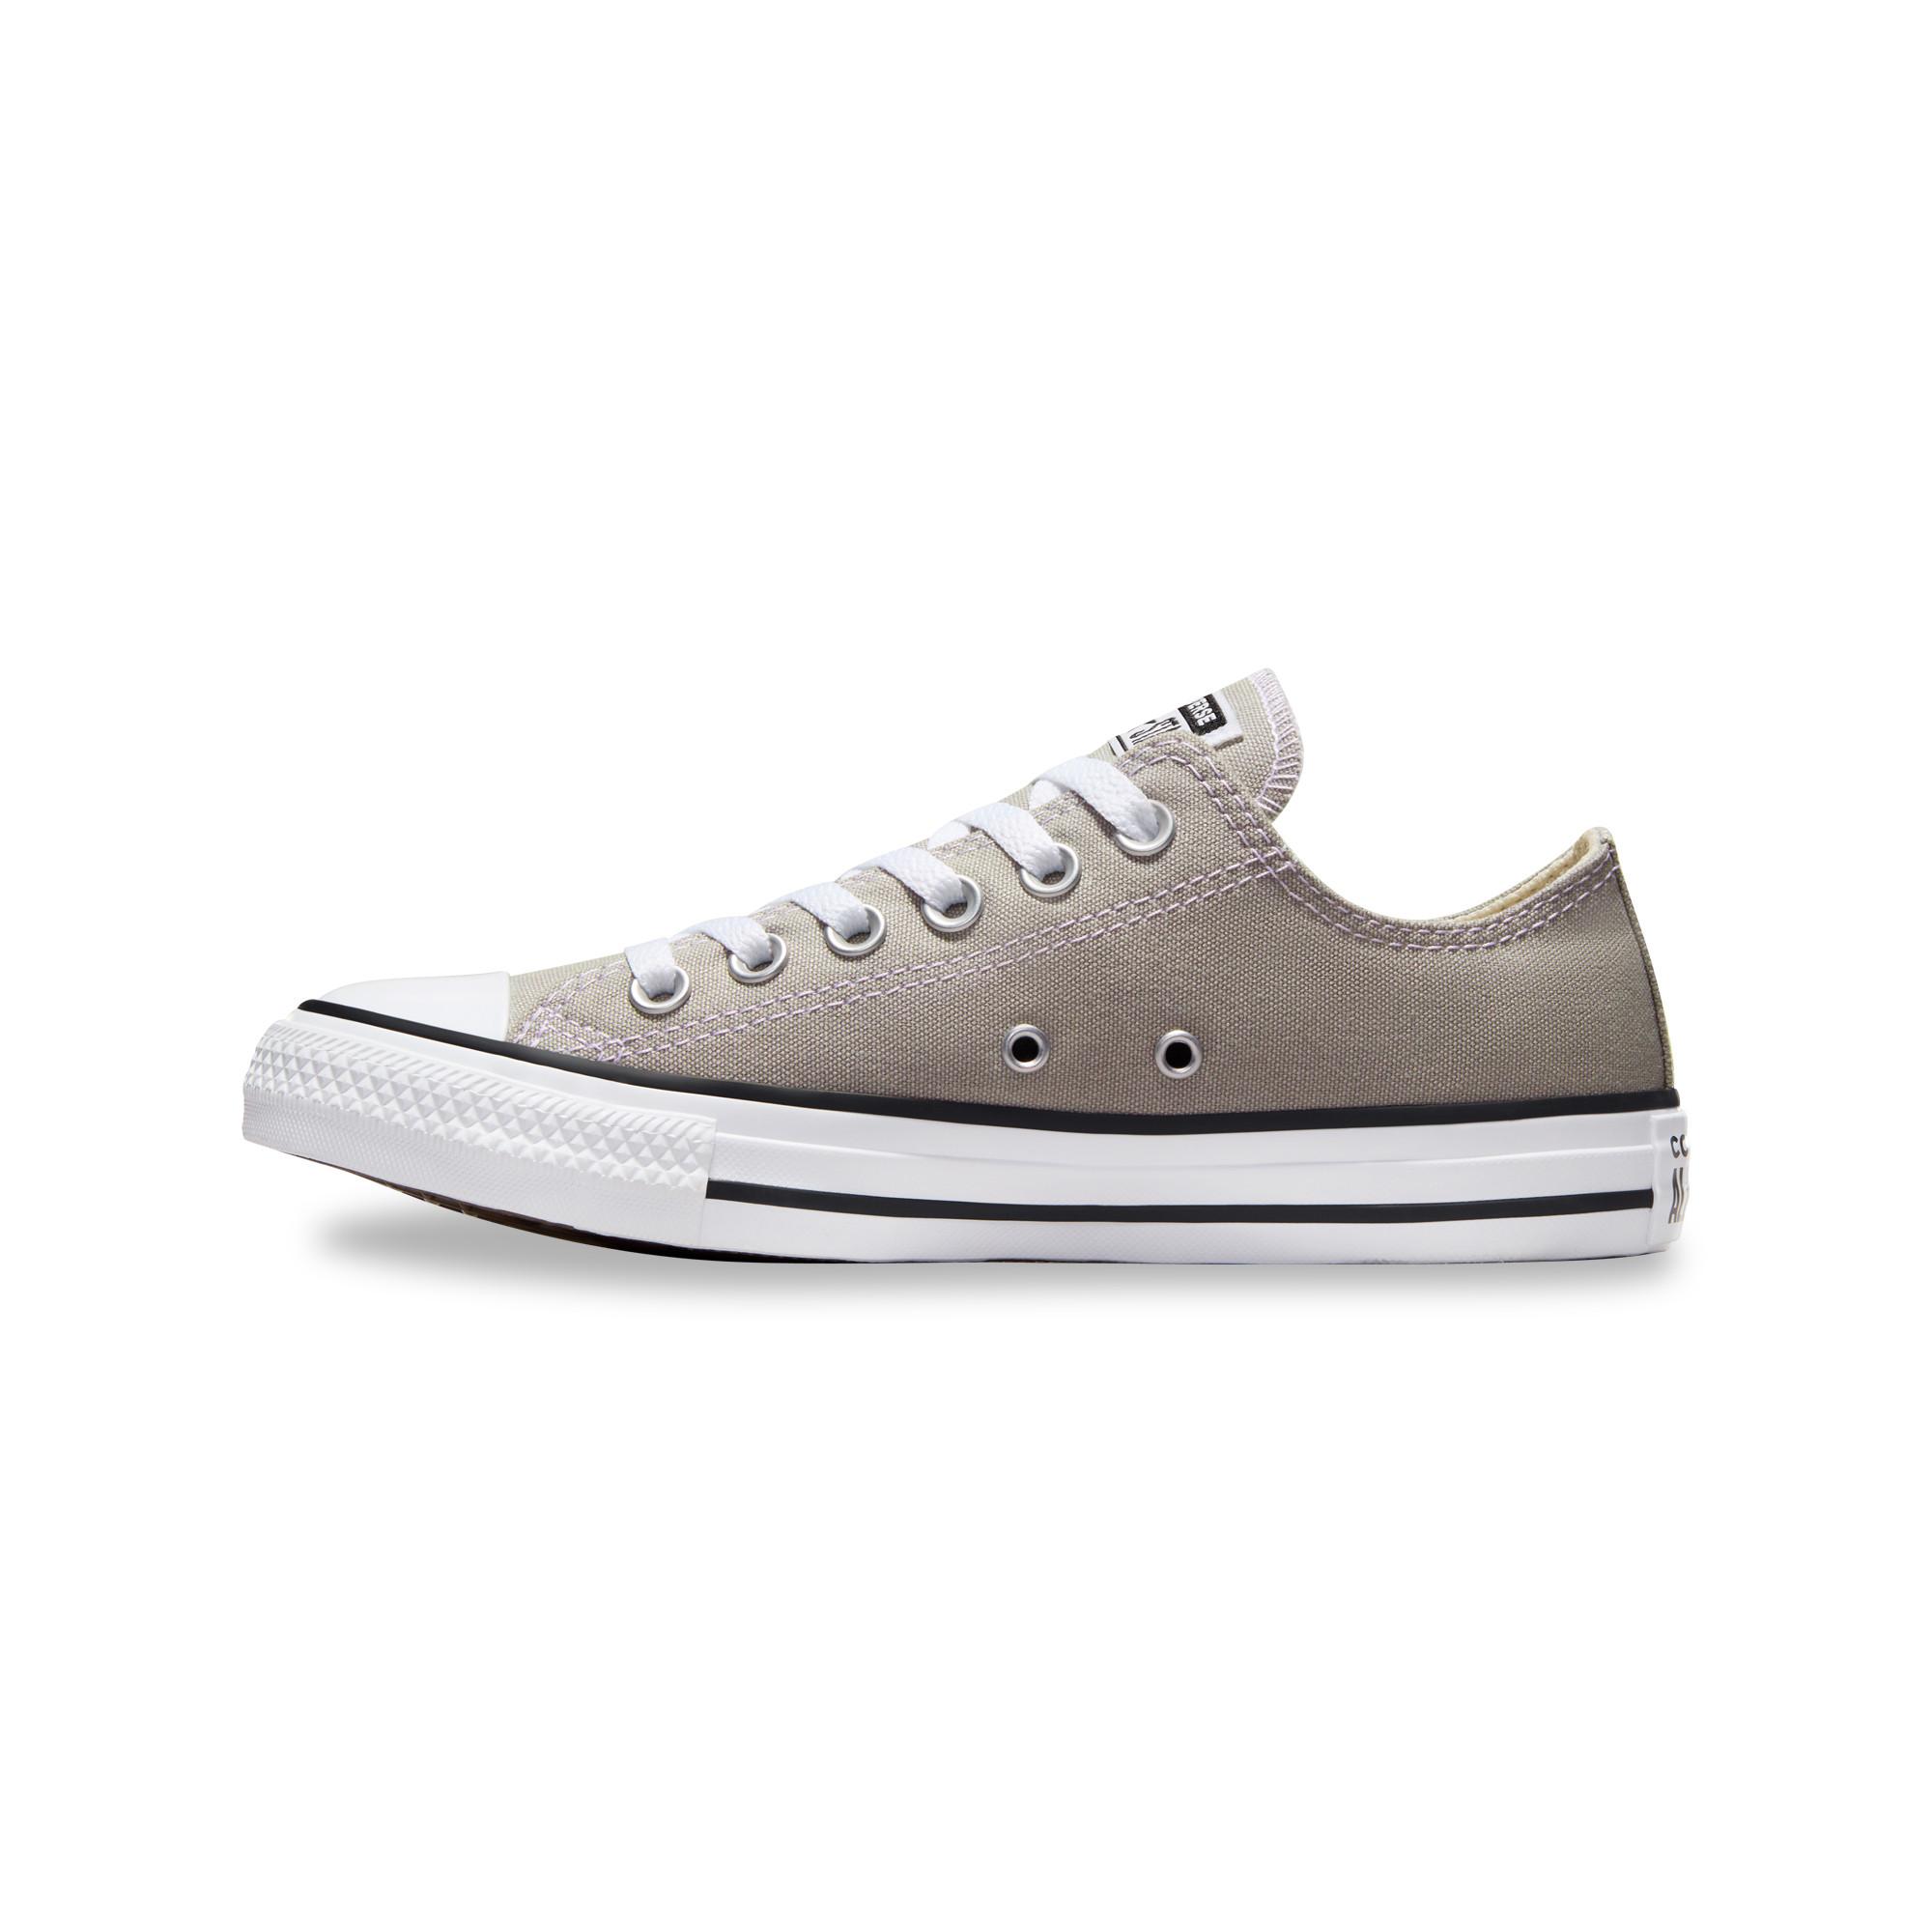 CONVERSE CHUCK TAYLOR ALL STAR Sneakers, Low Top 